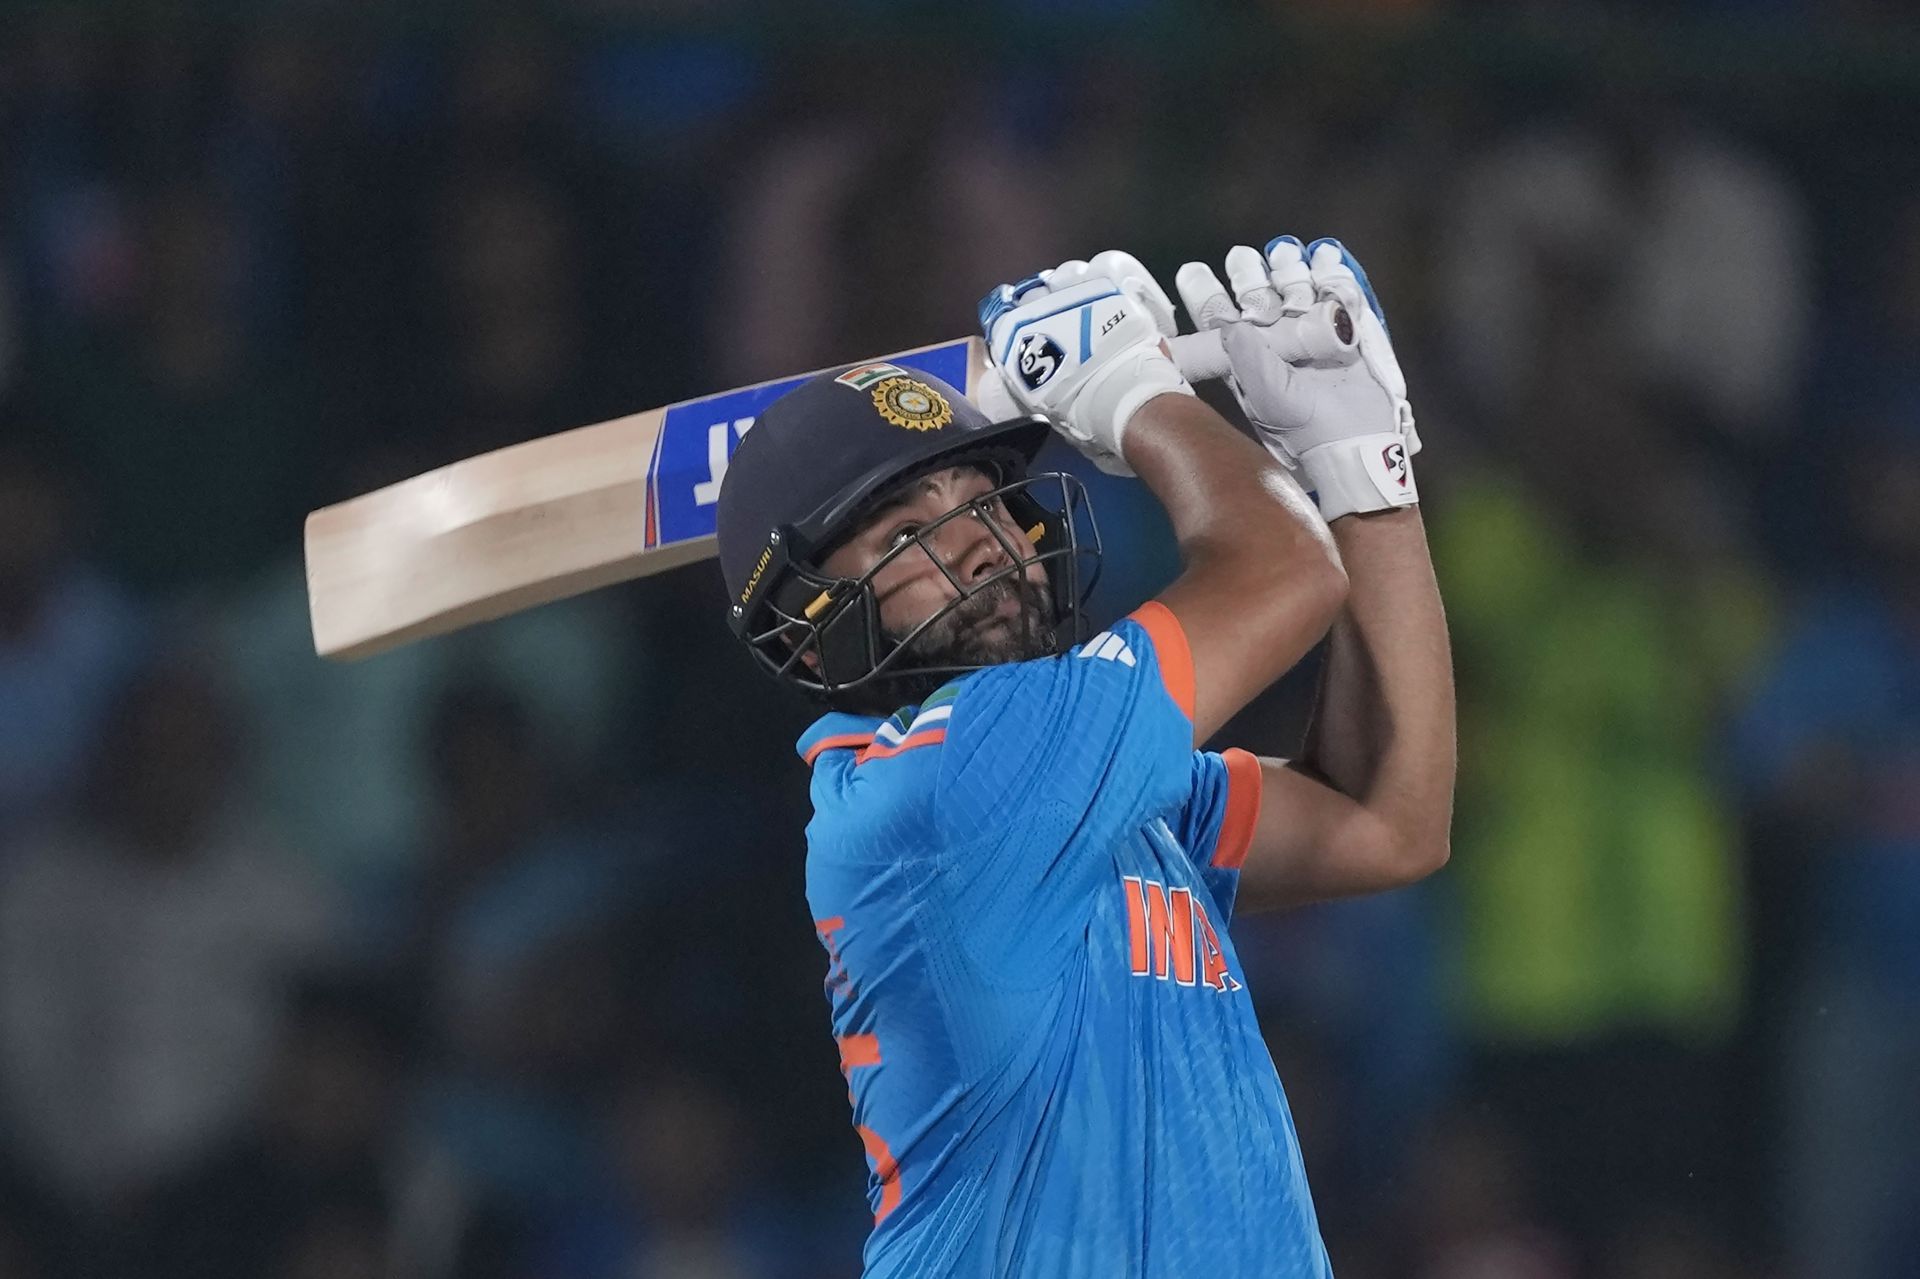 Rohit Sharma smashed 16 fours and five sixes in his innings. (P/C: AP)